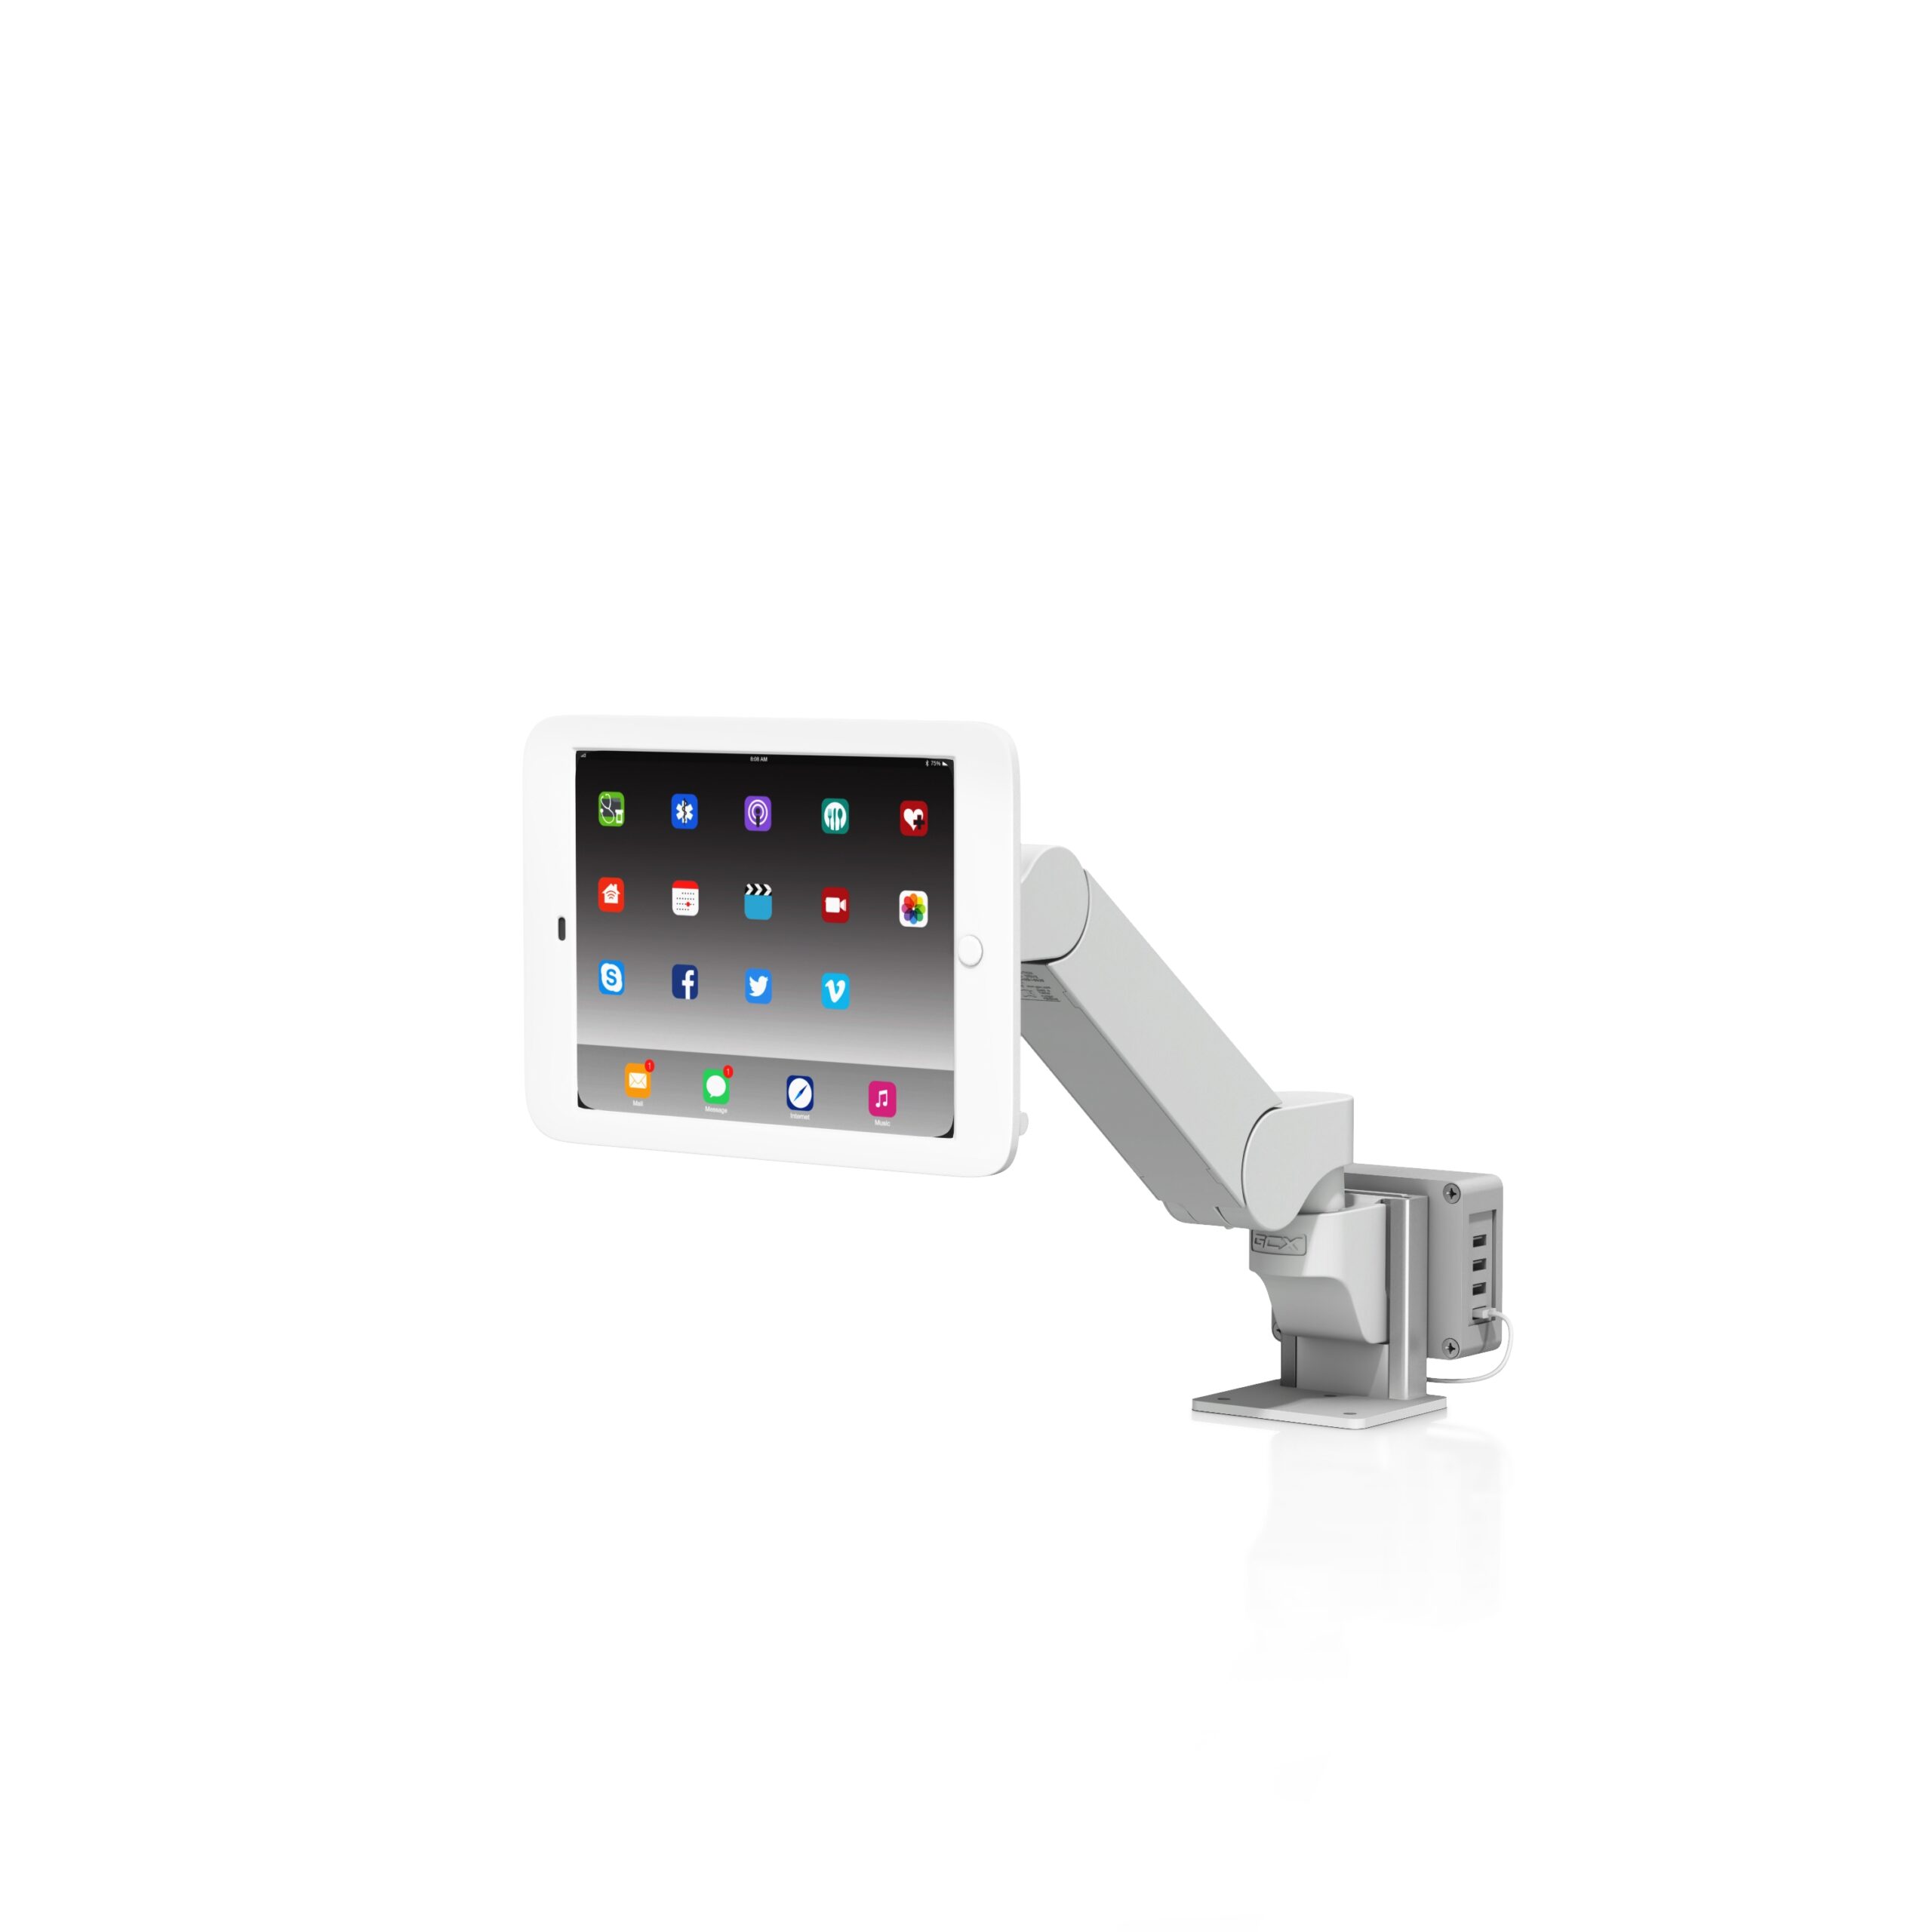 Countertop Mount for VHM-T Variable Height Arm for Tablets with USB Hub